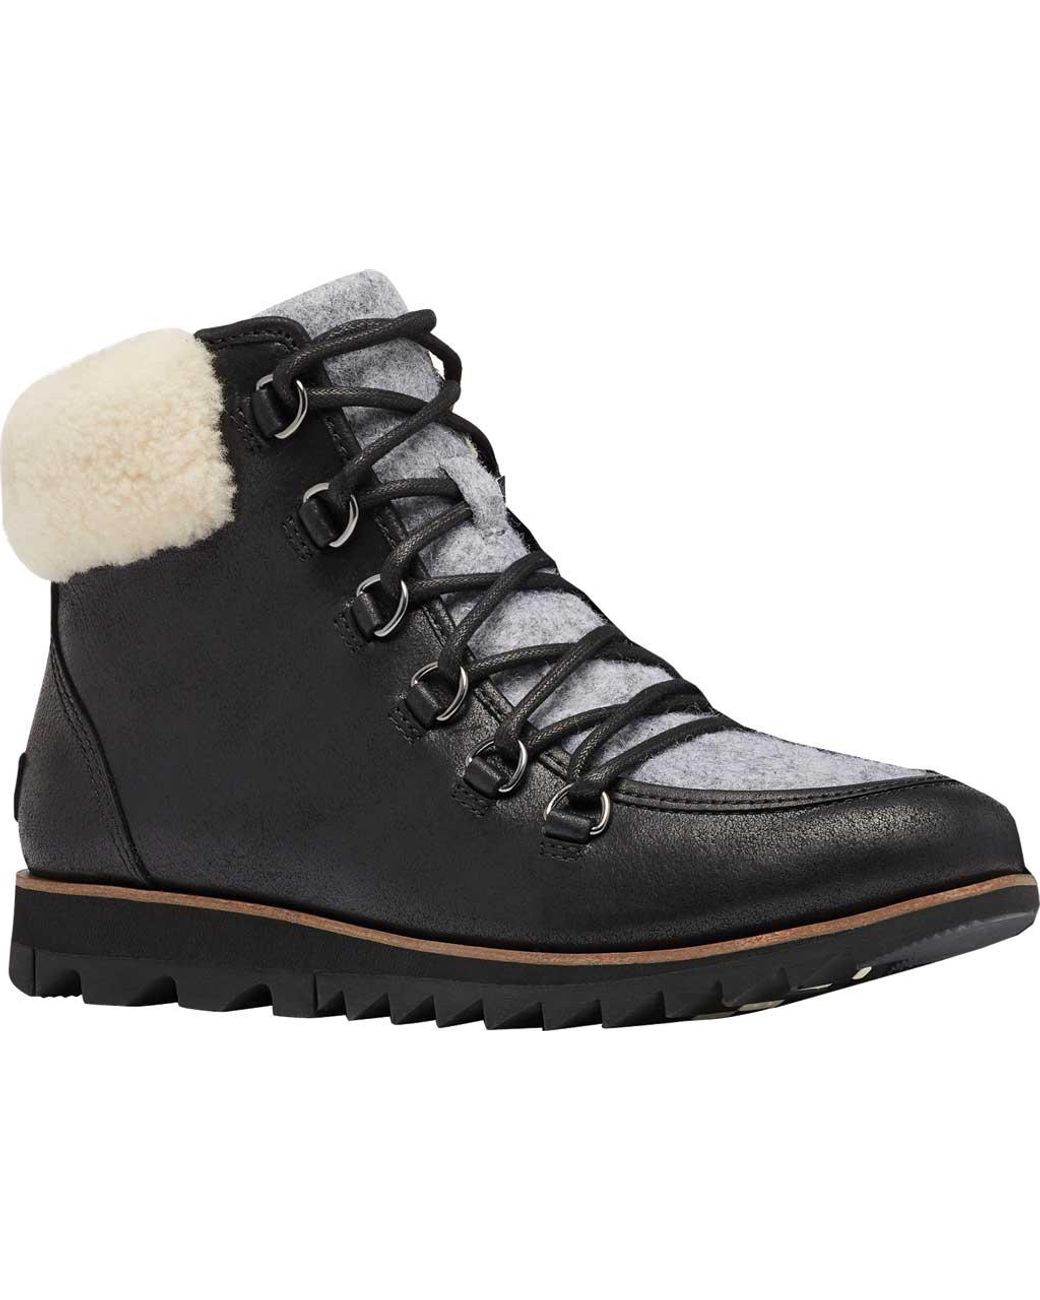 Sorel Rubber Harlow Lace Up Cozy Ankle Bootie in Black - Lyst